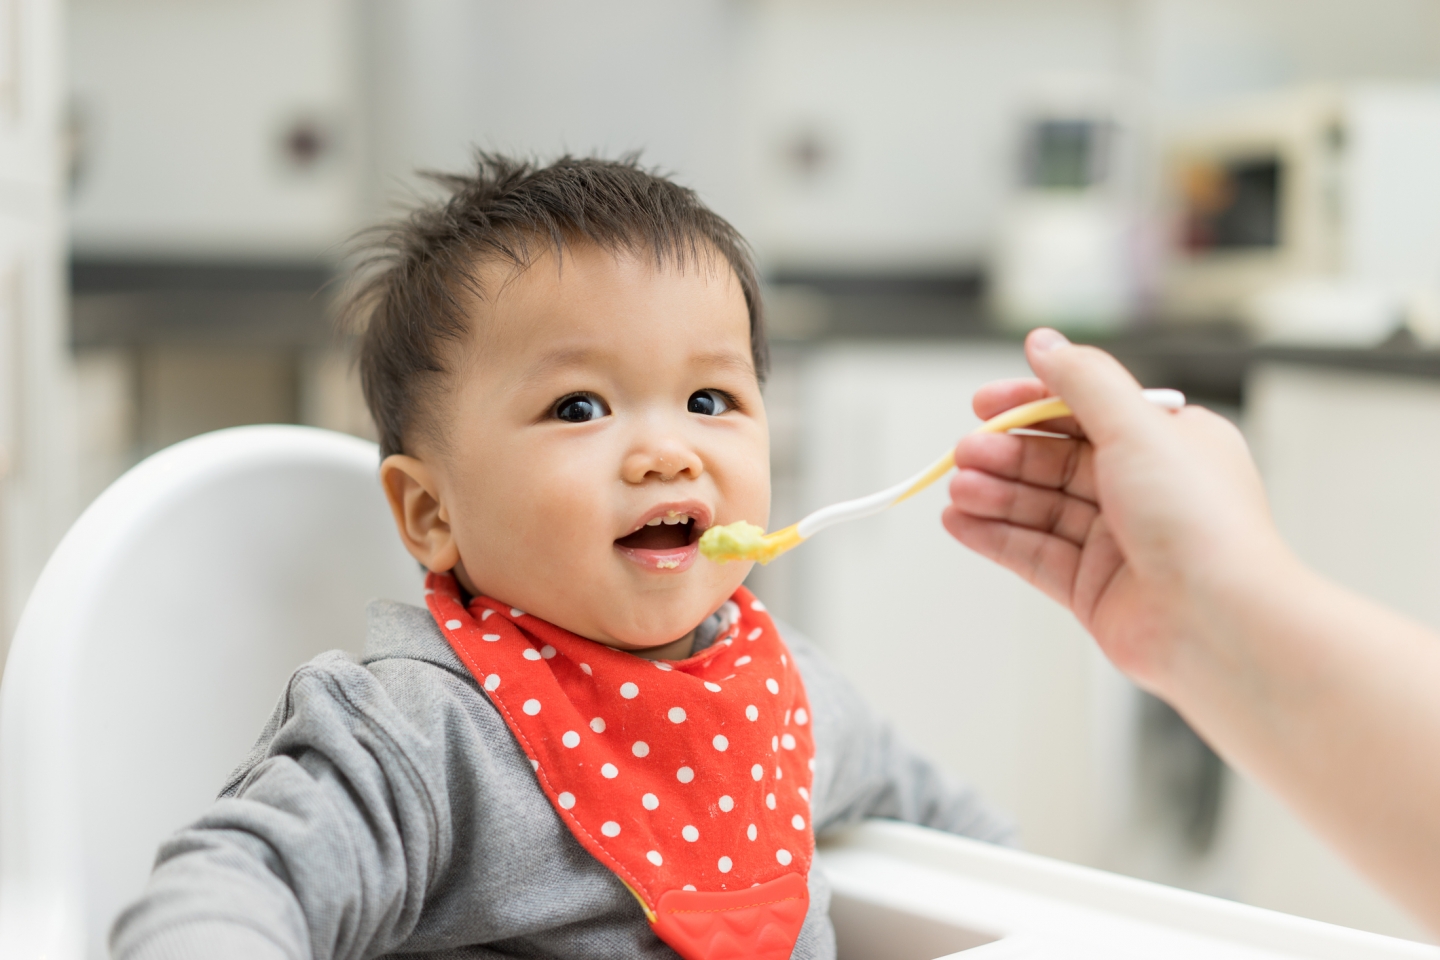 Infant being fed in his high chair